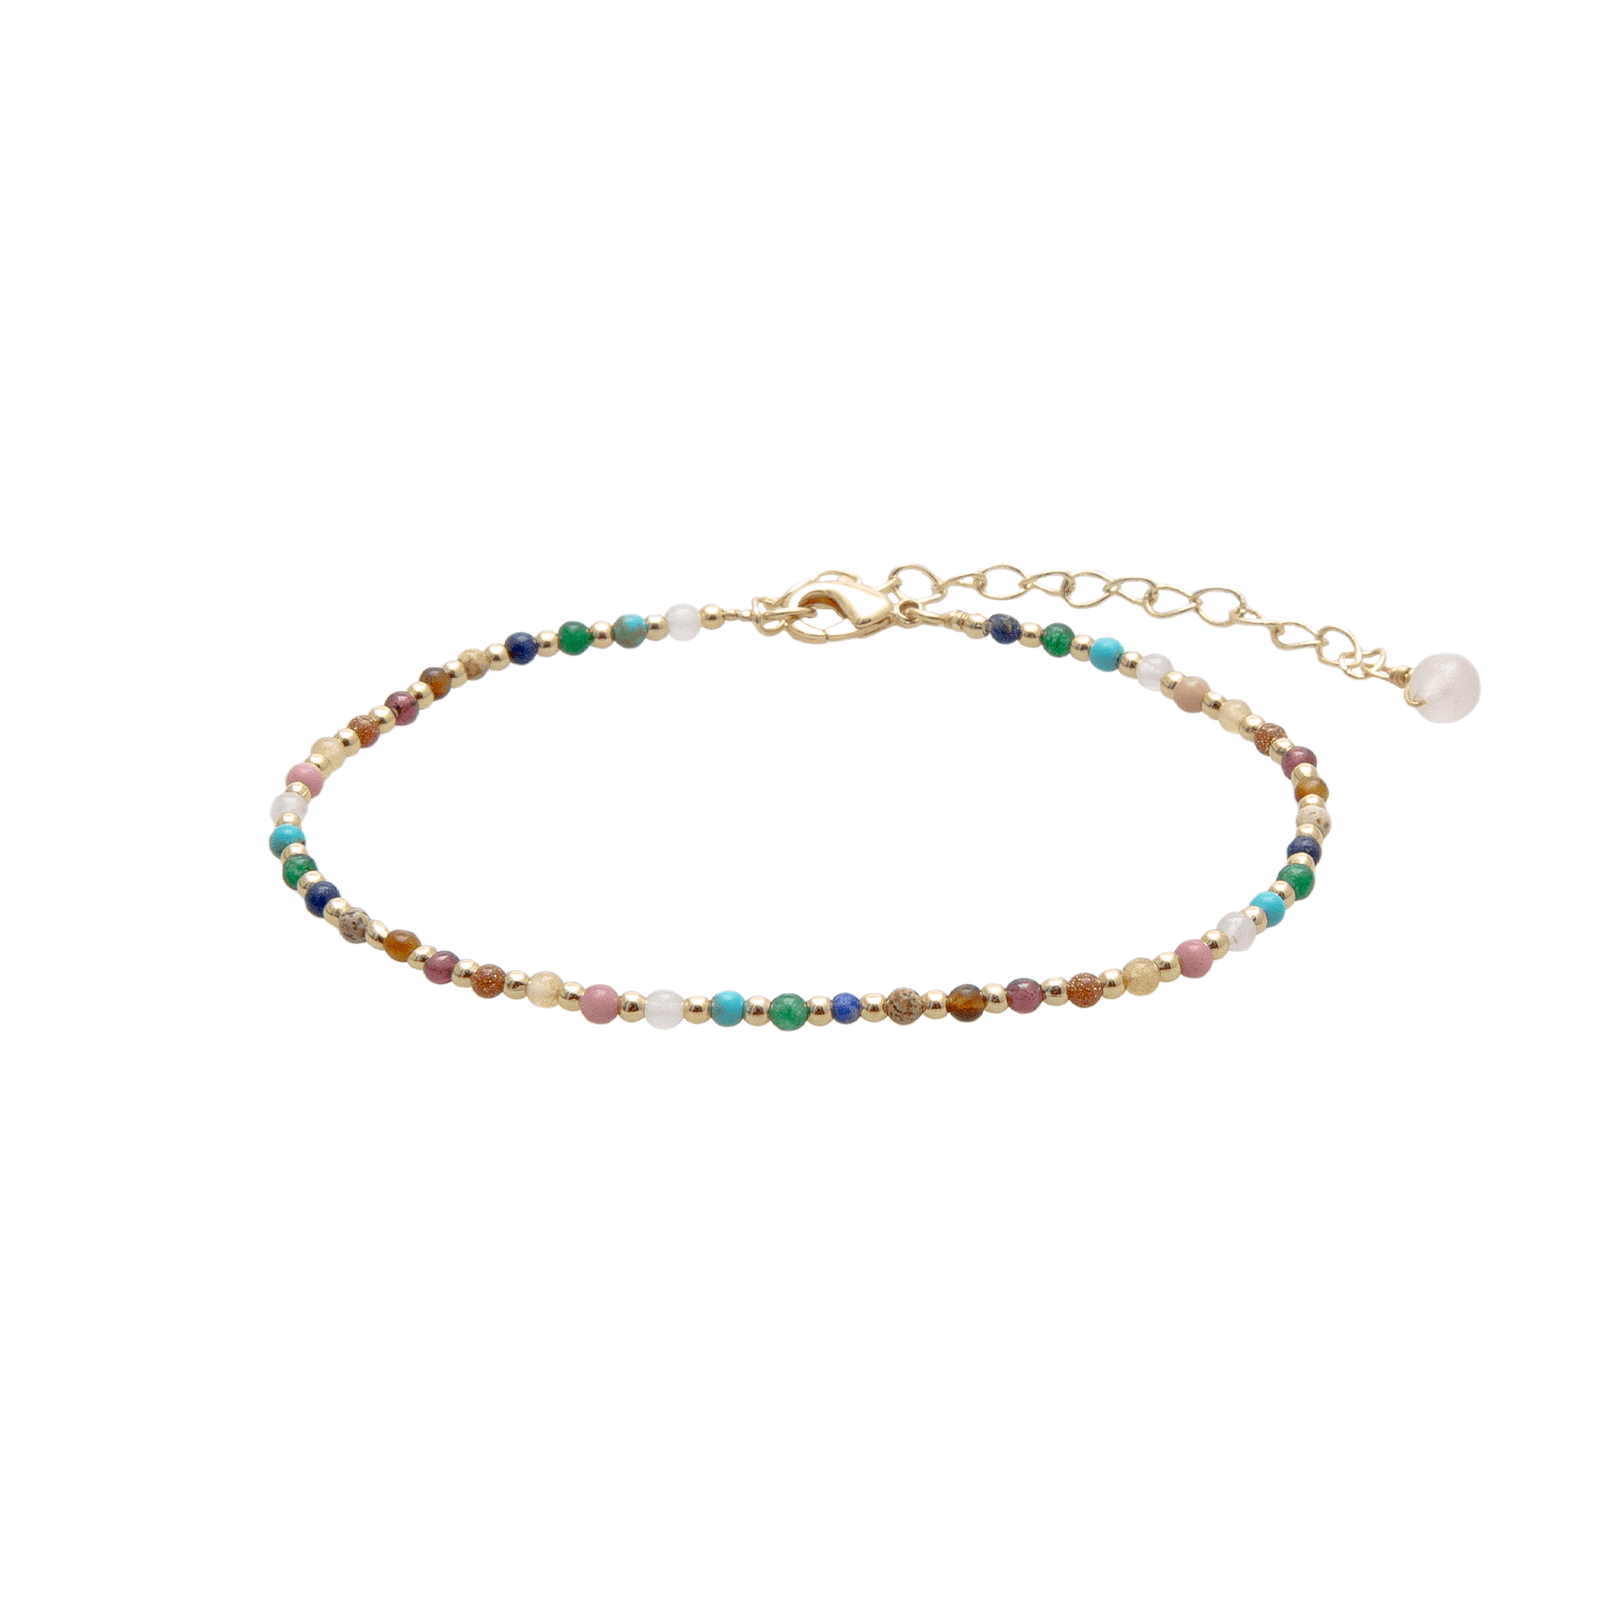 Dainty anklet with assorted multi-color stones and gold beads